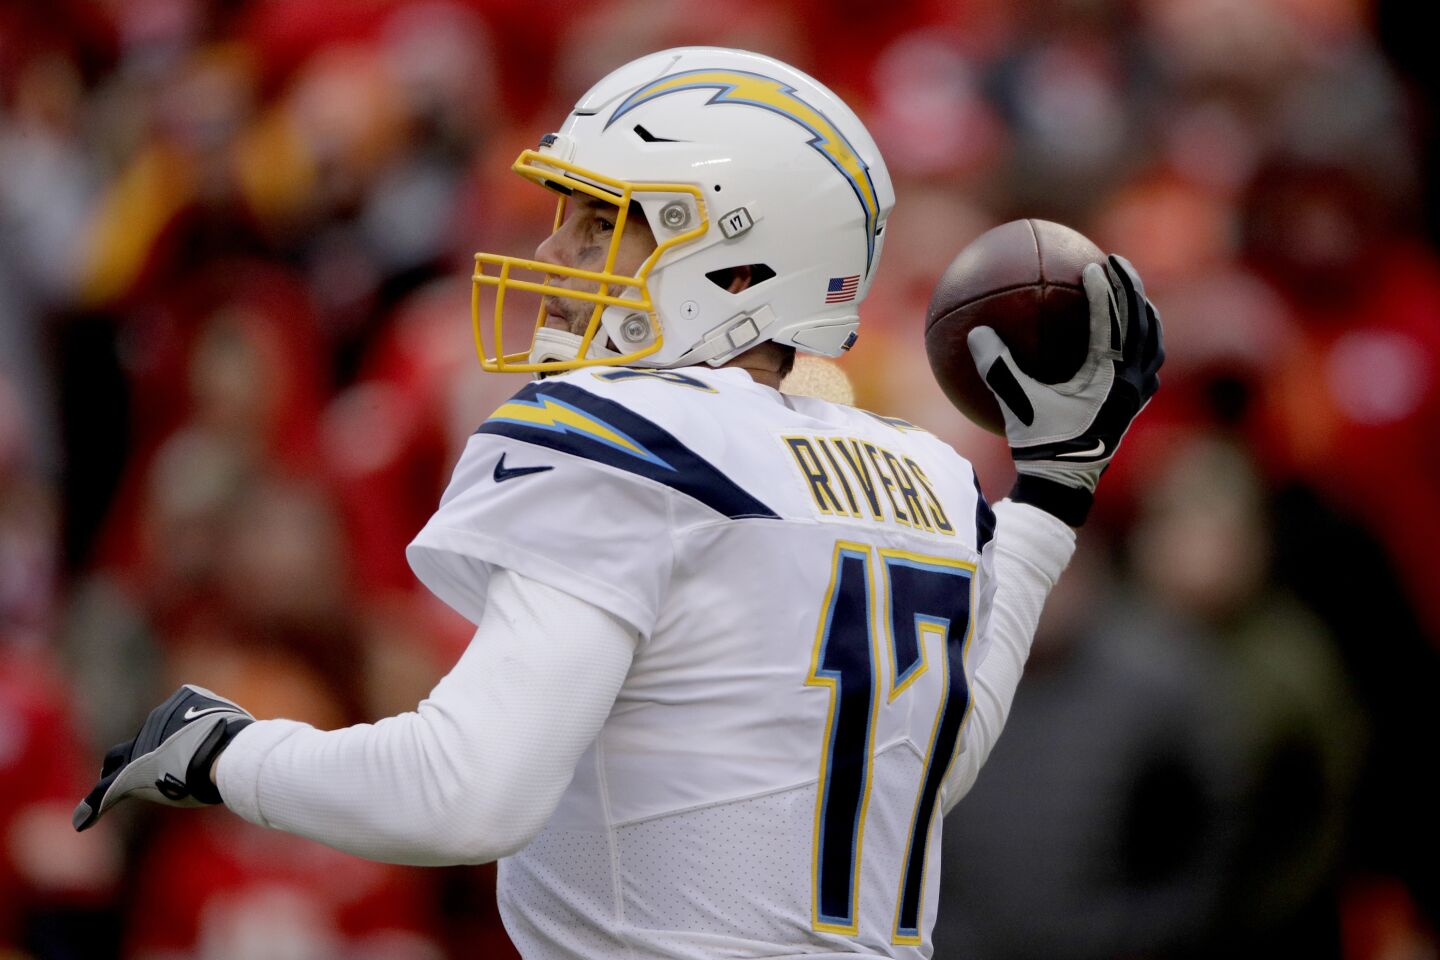 Chargers quarterback Philip Rivers (17) looks to pass during a game against the Chiefs on Dec. 29.